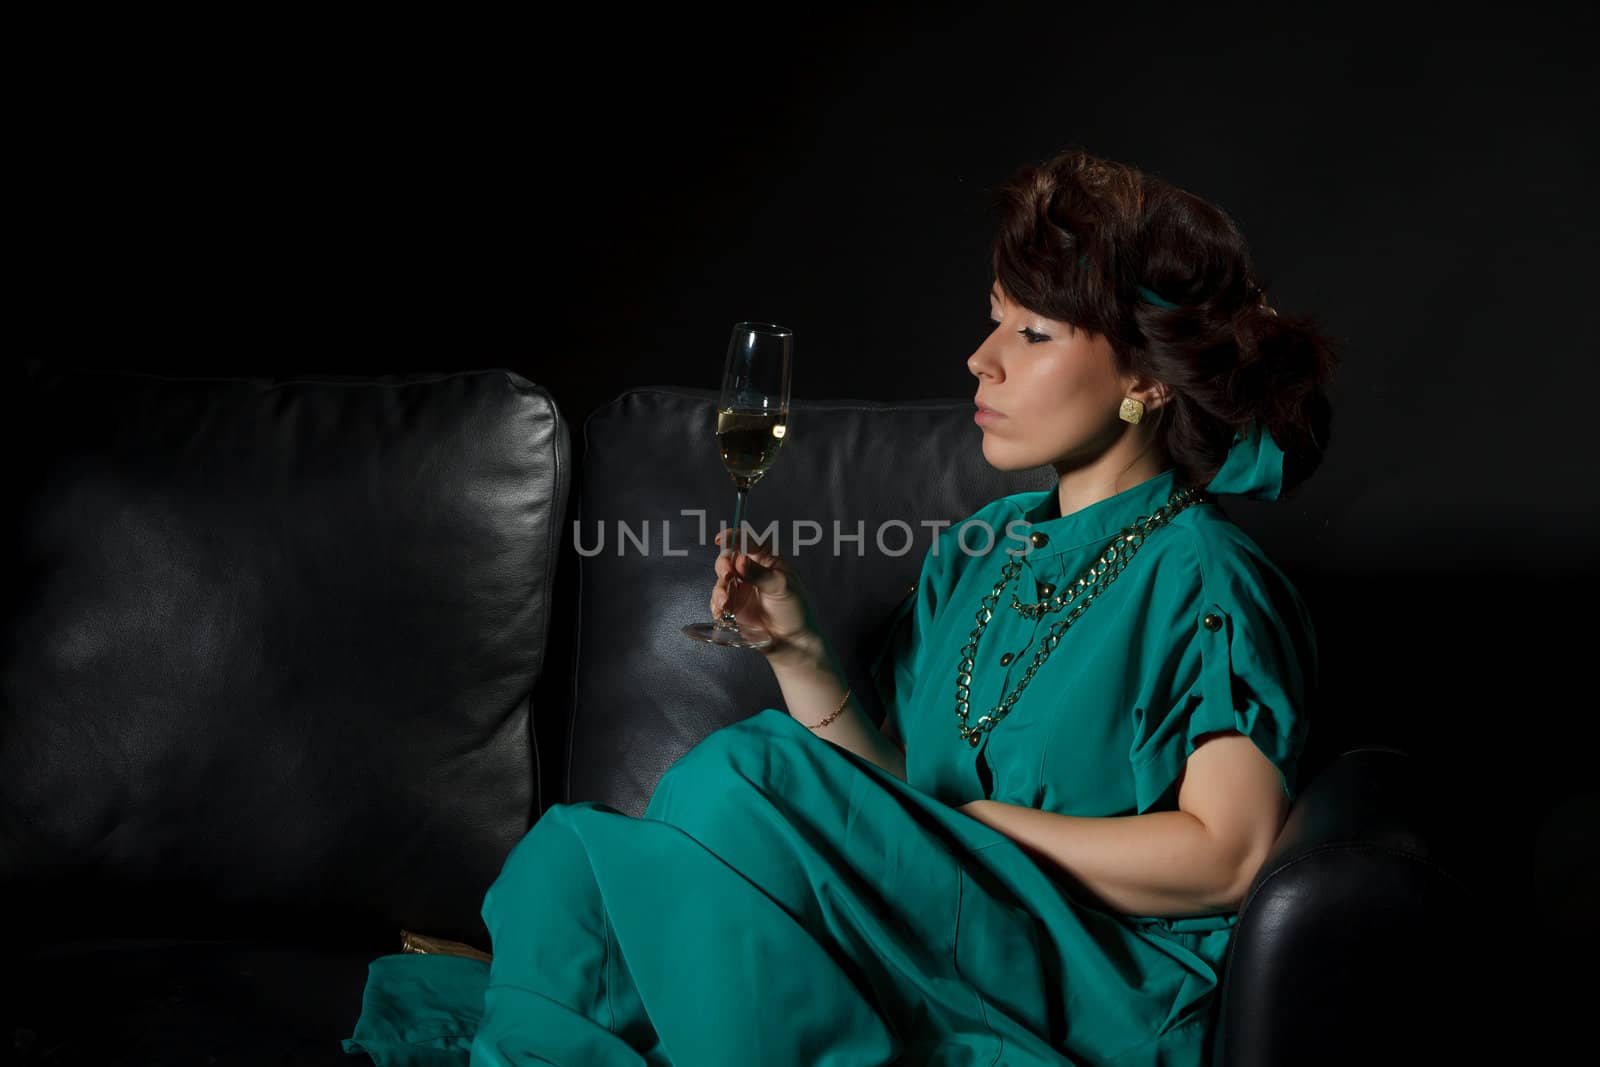 Beautiful girl sitting on a sofa with glass of wine, black background